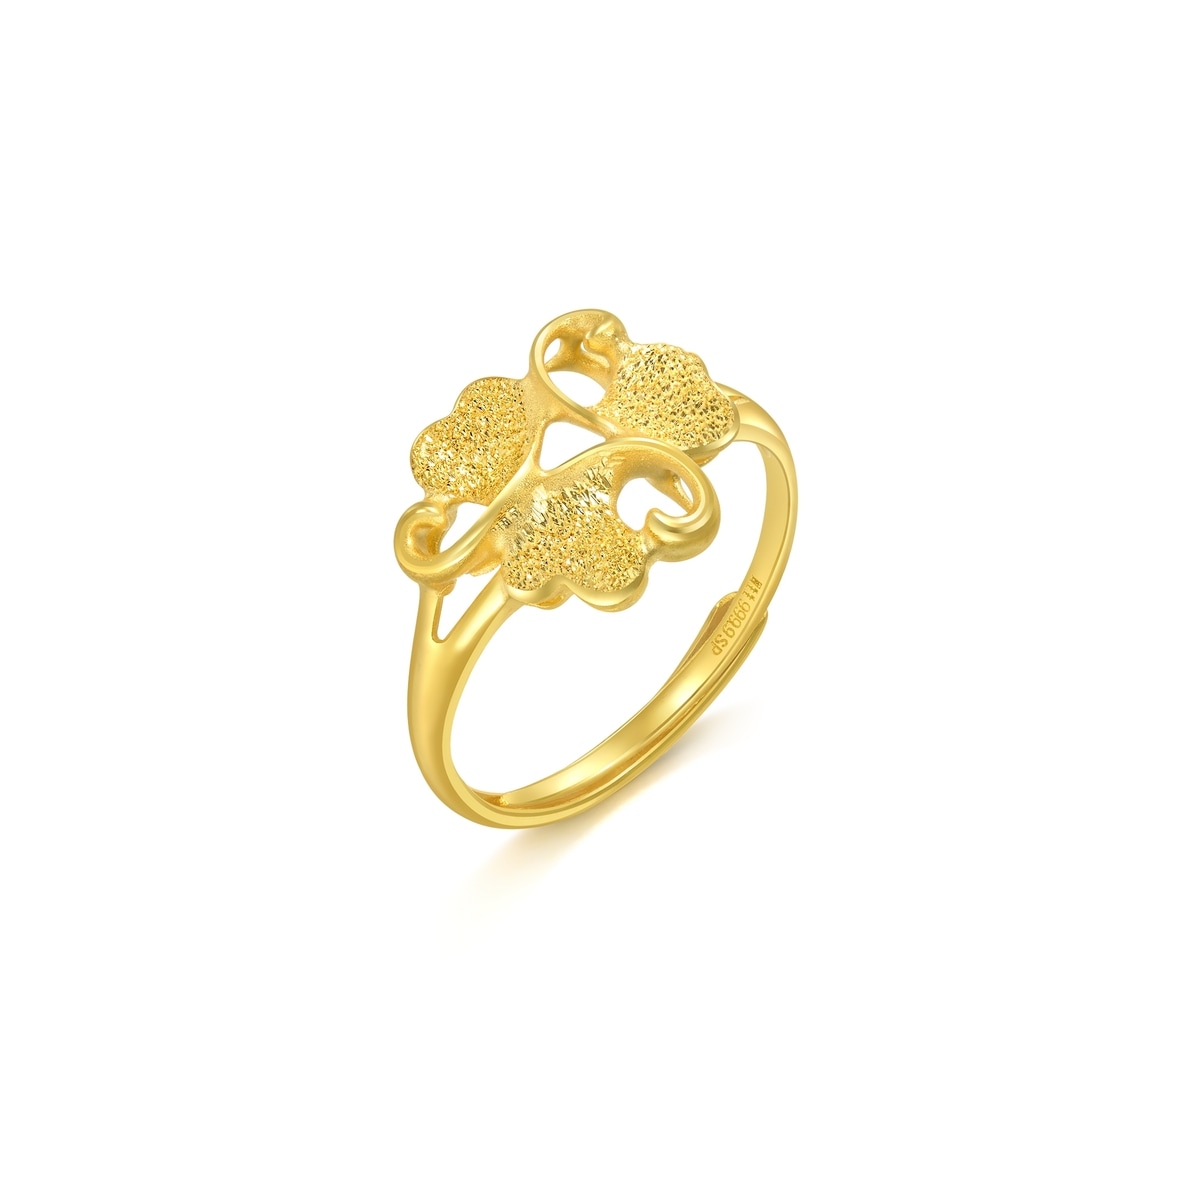 999.9 Gold Ring(348691-WT-0.1030) | Chow Sang Sang Jewellery